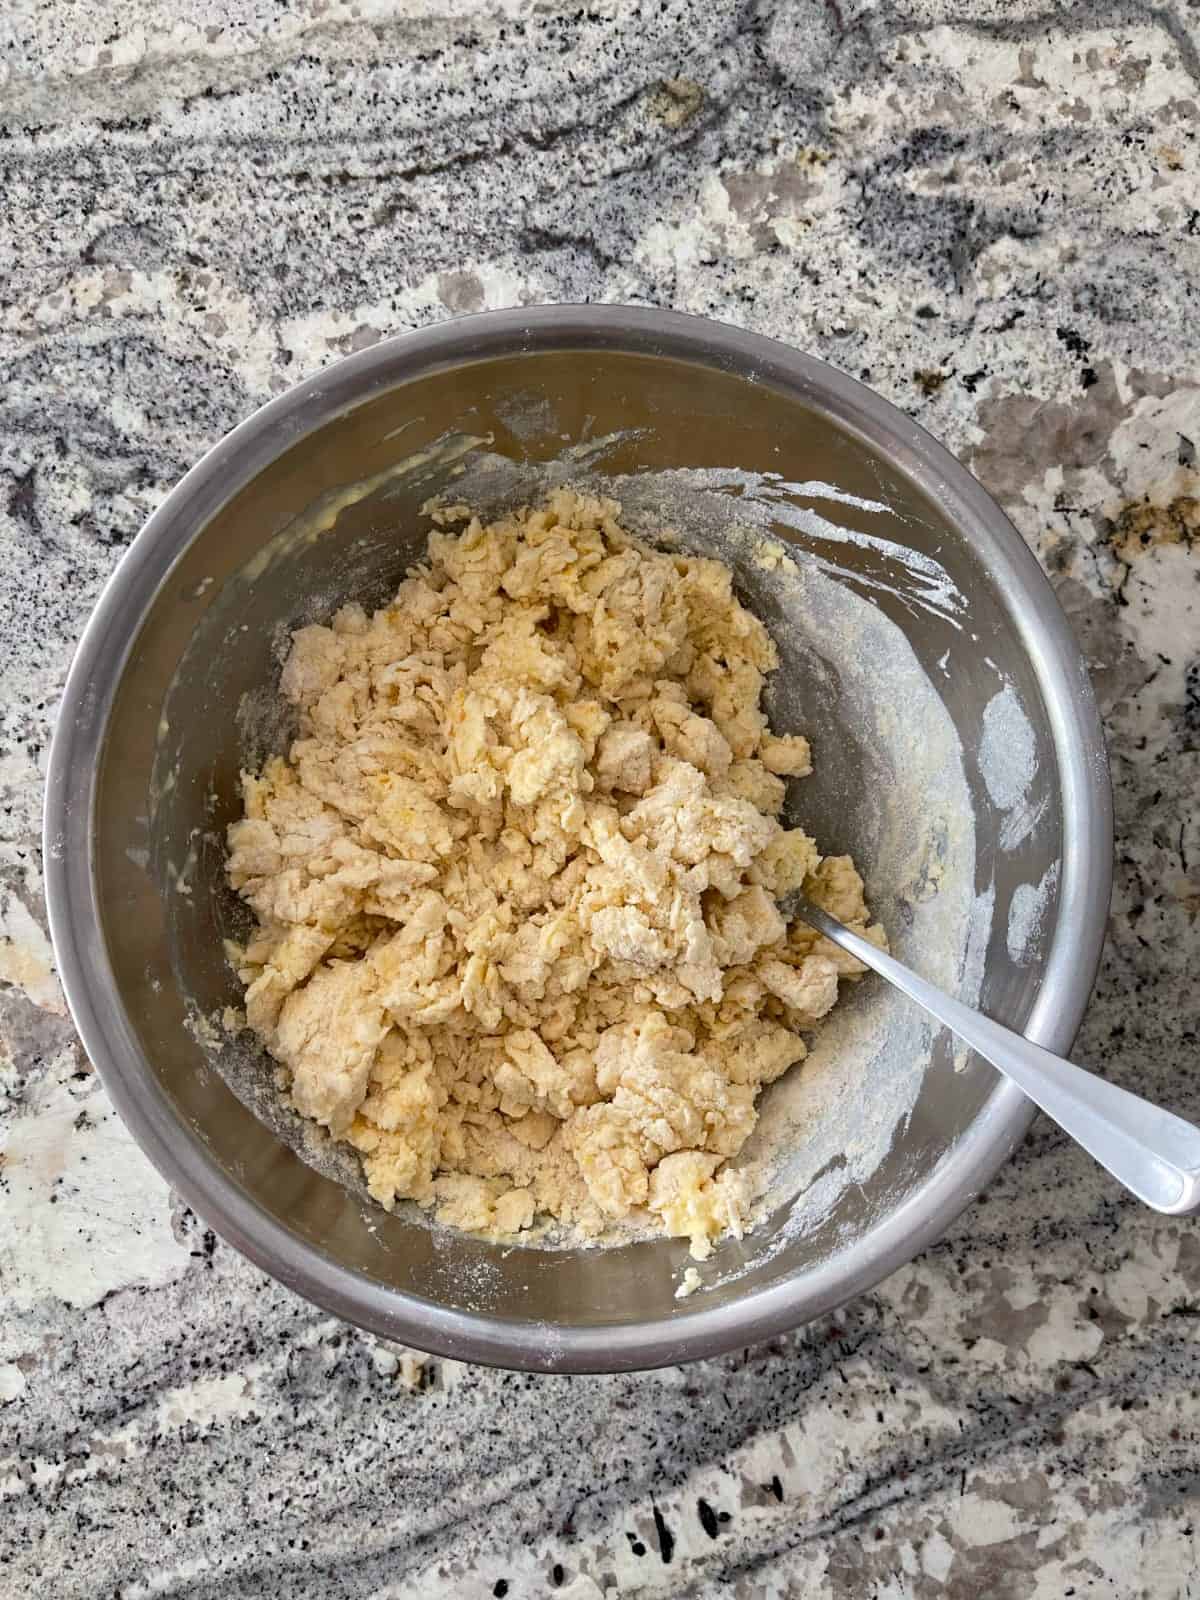 Mixing orange scone dough in mixing bowl with fork.